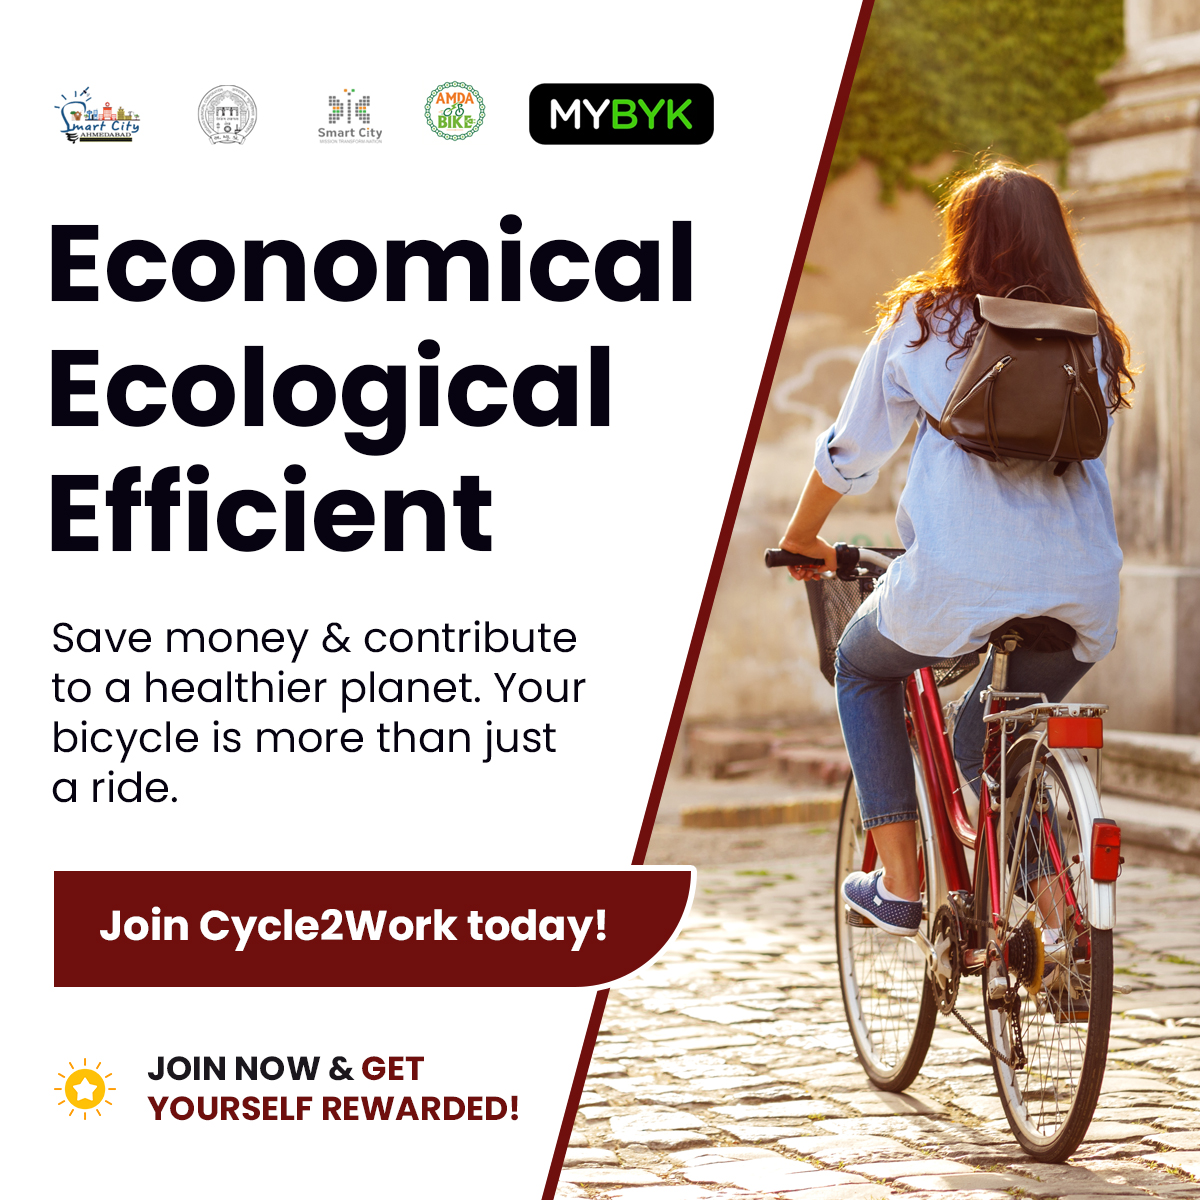 Save money on fuel, parking, and gym memberships by choosing to #Cycle2Work.

It's a win for you, a win for your health, and a win for our planet!

Click bit.ly/3M6pN86 to join!

#EcoFriendlyCommute #SmartCityAhmedabad #Ahmedabad